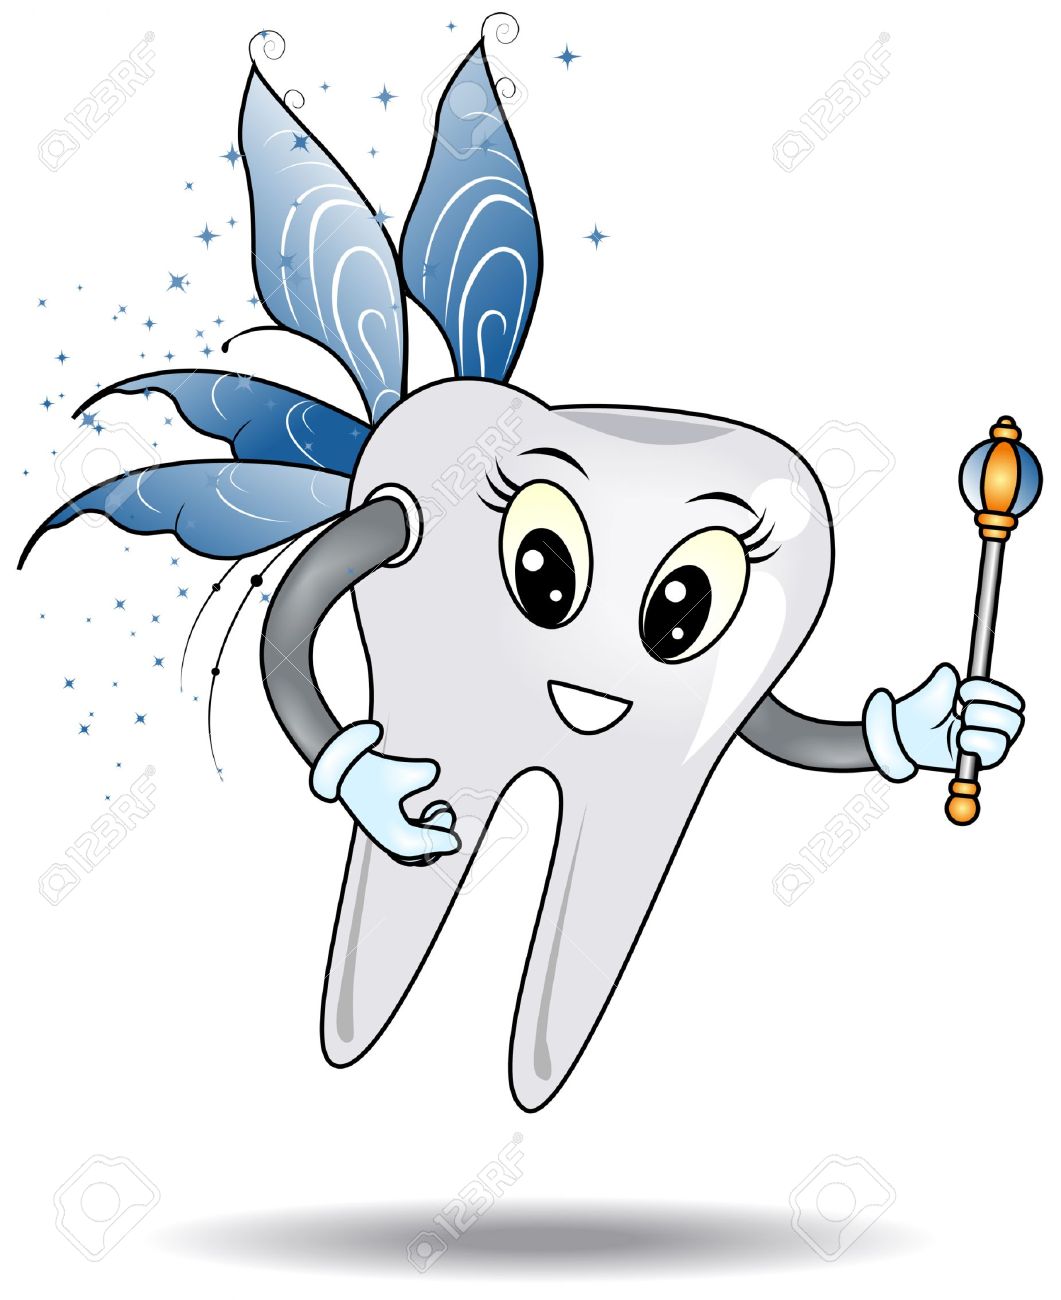 Tooth Fairy with Clipping Path Stock Vector - 3699154